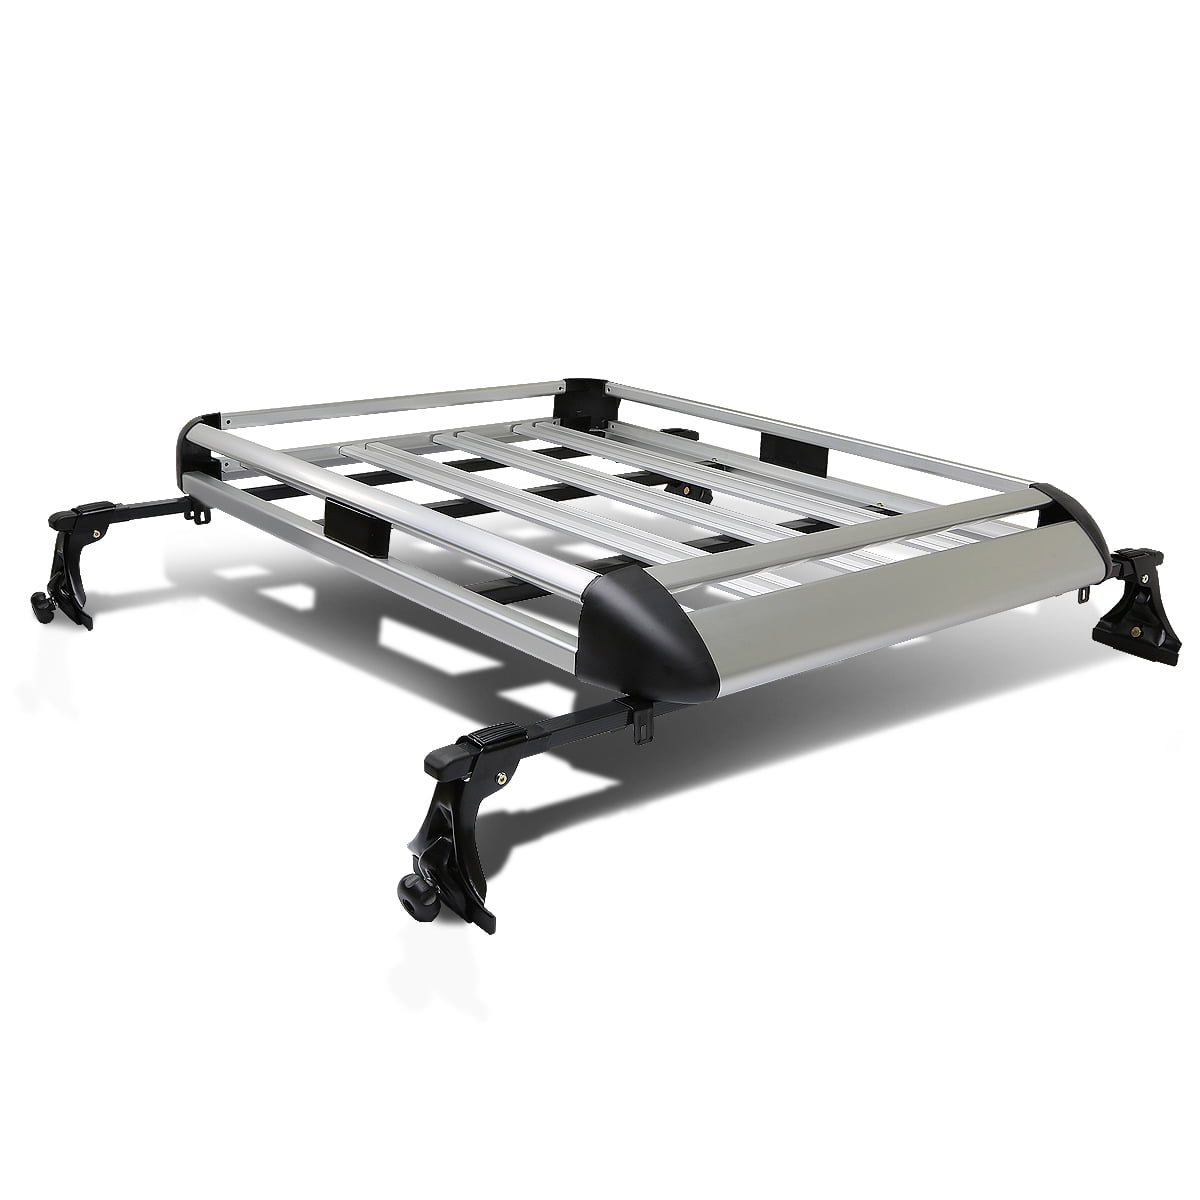 Silver 50 inches x 31 inch Aluminum Roof Rack Top Cargo Carrier Basket+Cross Bar